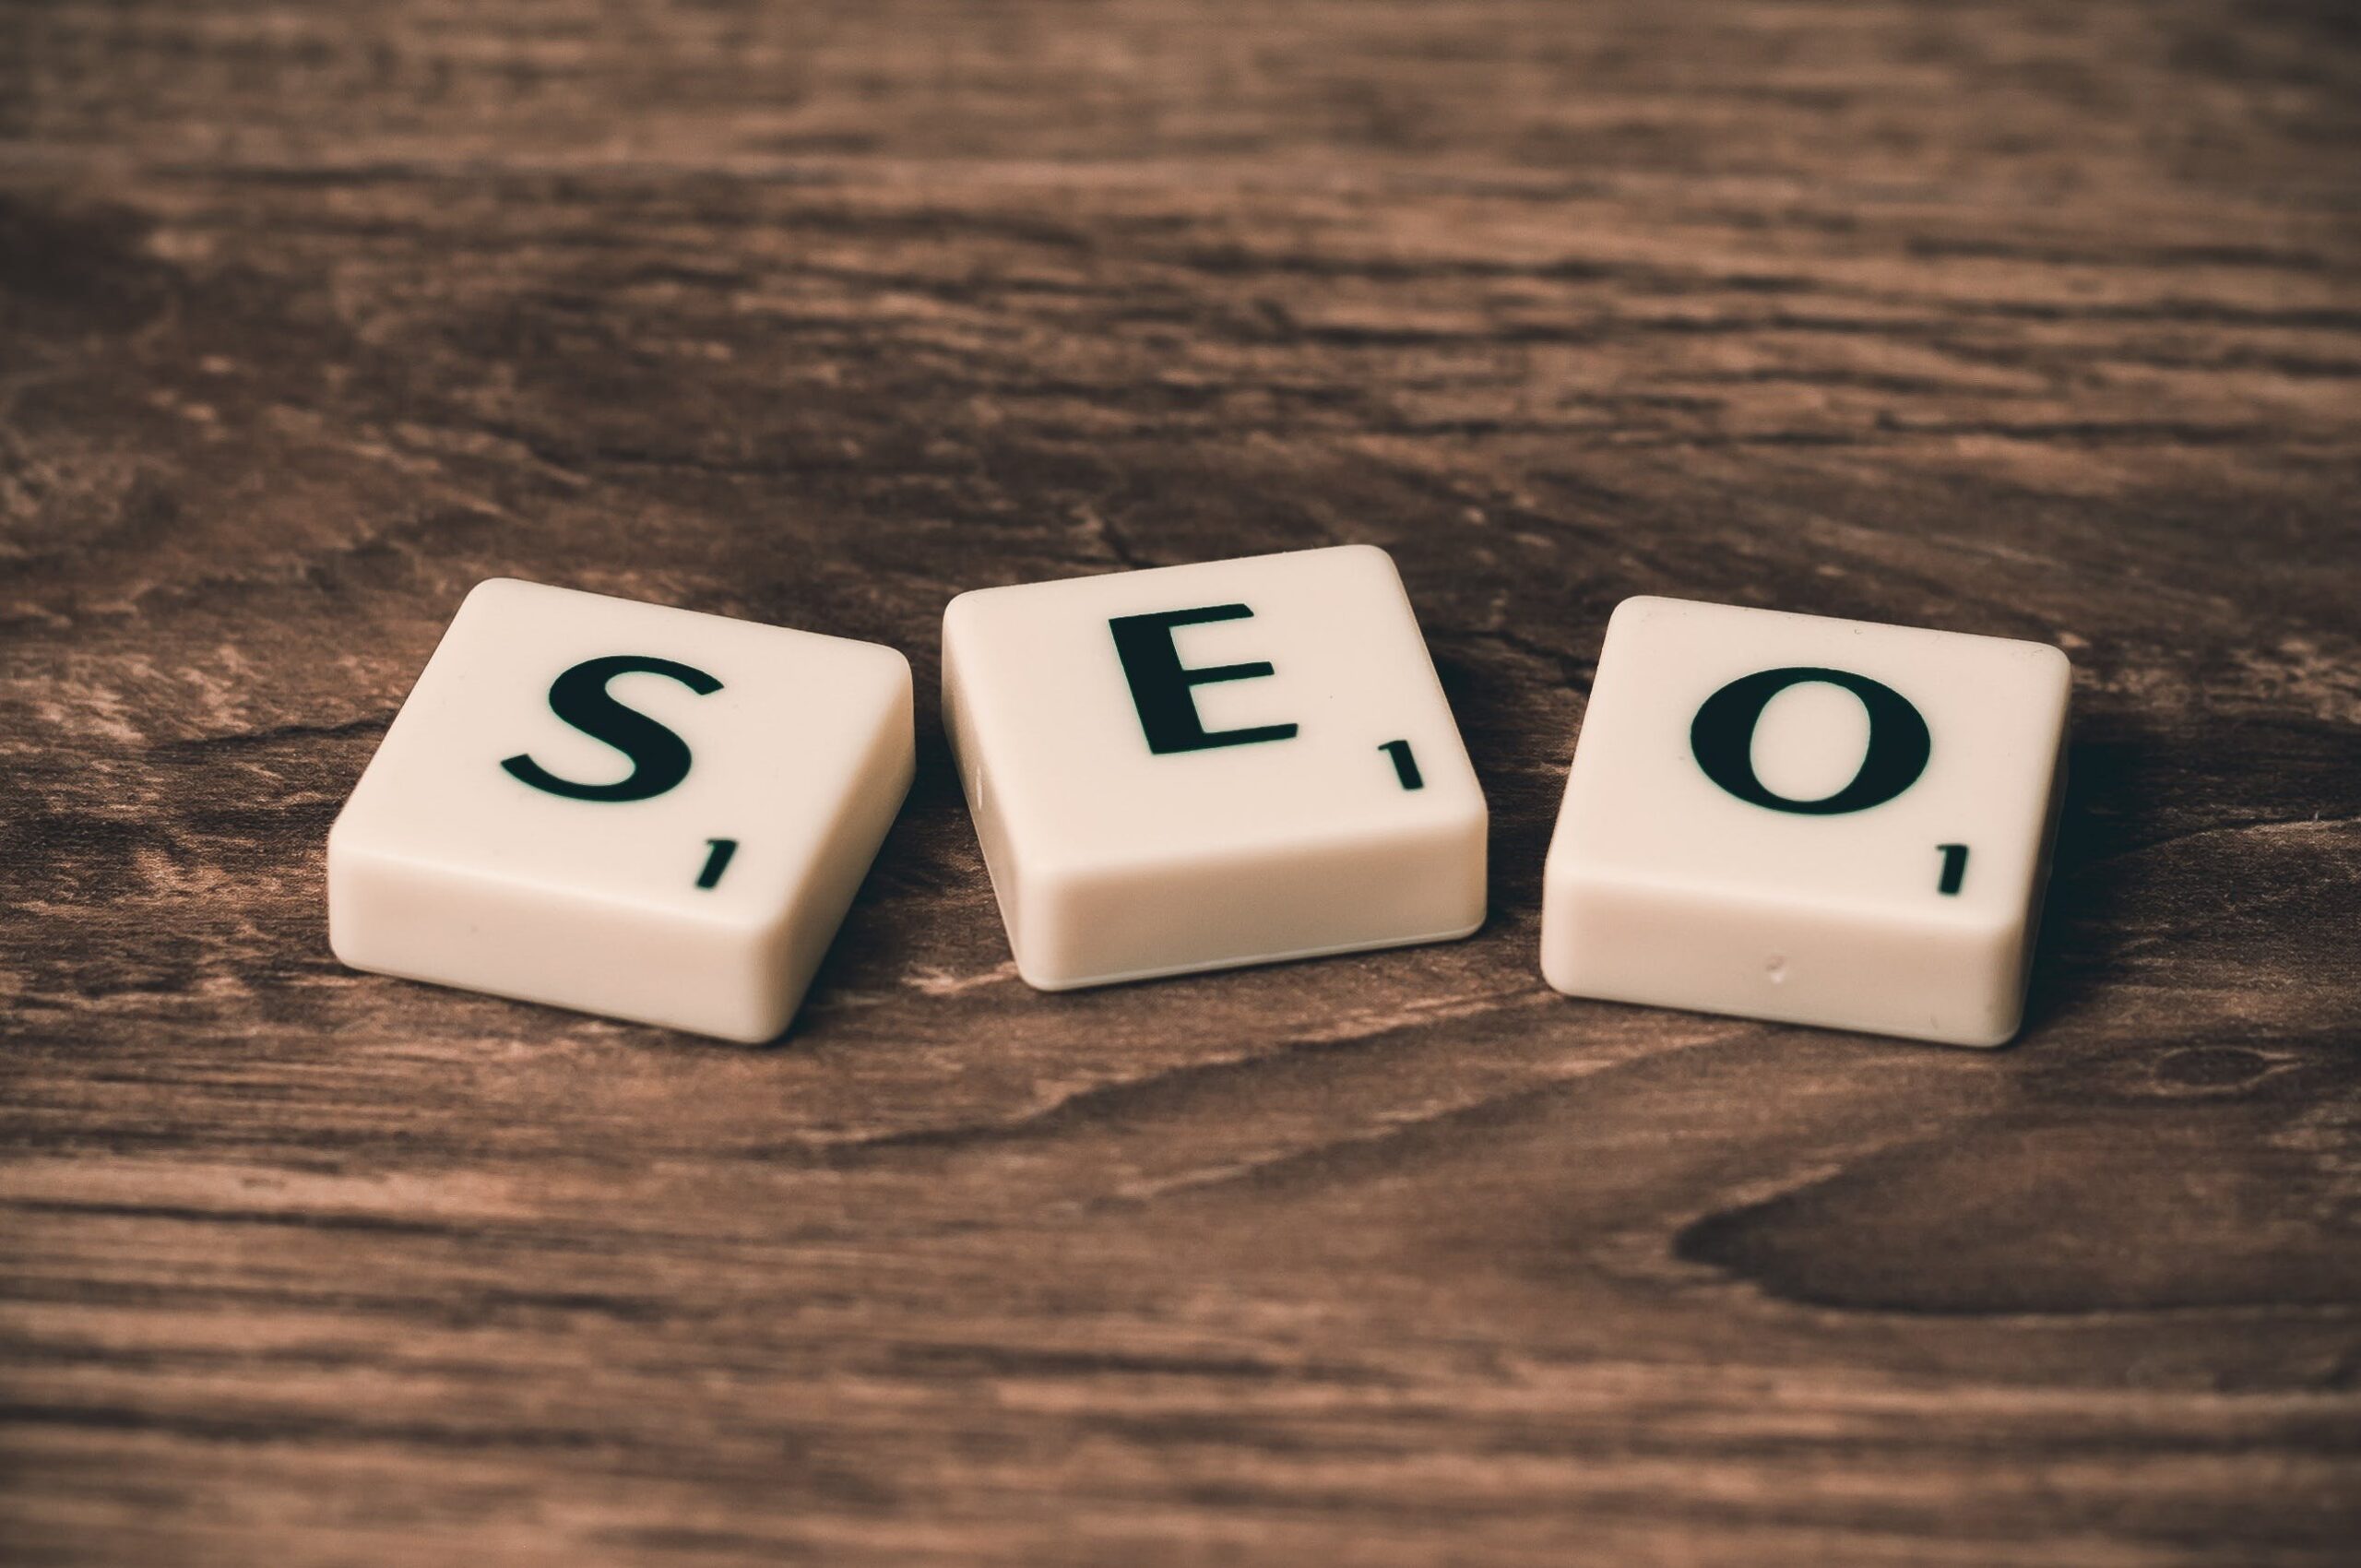 Geek insider, geekinsider, geekinsider. Com,, how to use seo to get a small business off the ground, internet